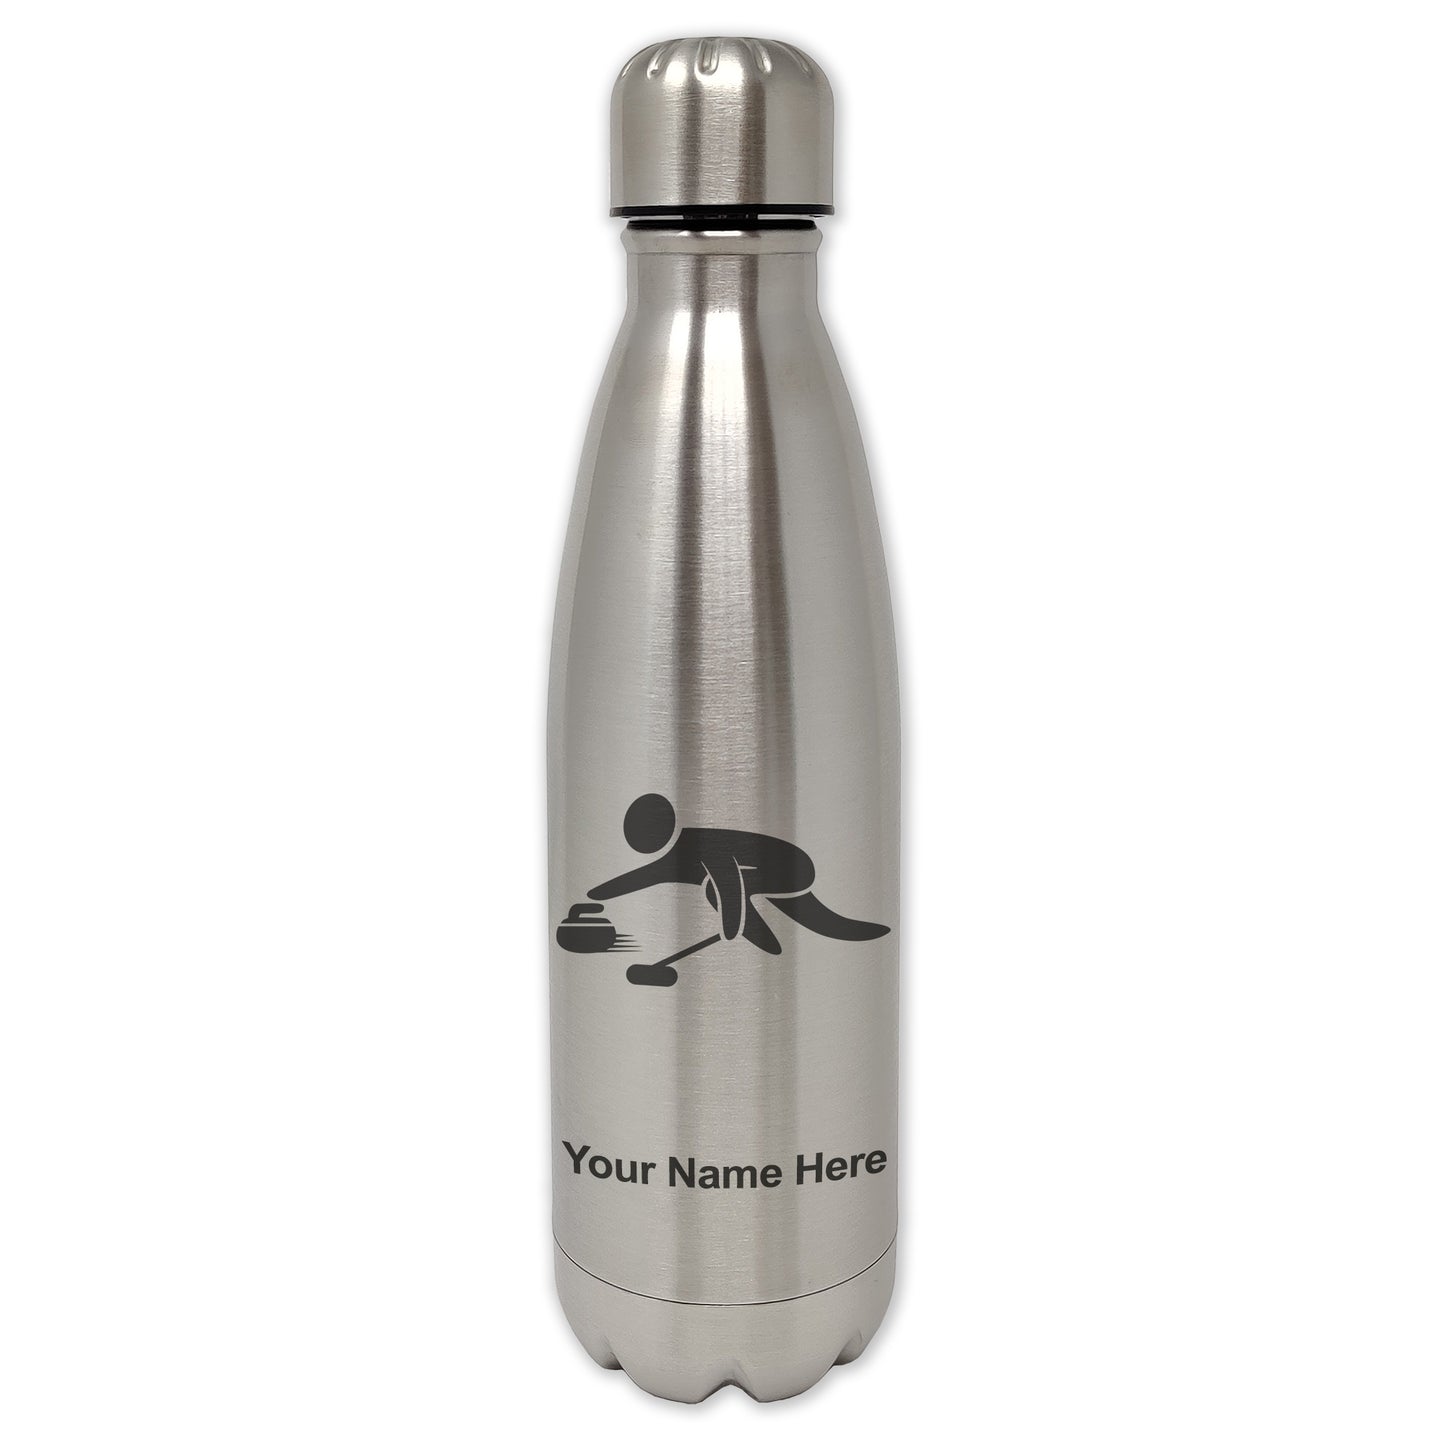 LaserGram Double Wall Water Bottle, Curling Figure, Personalized Engraving Included